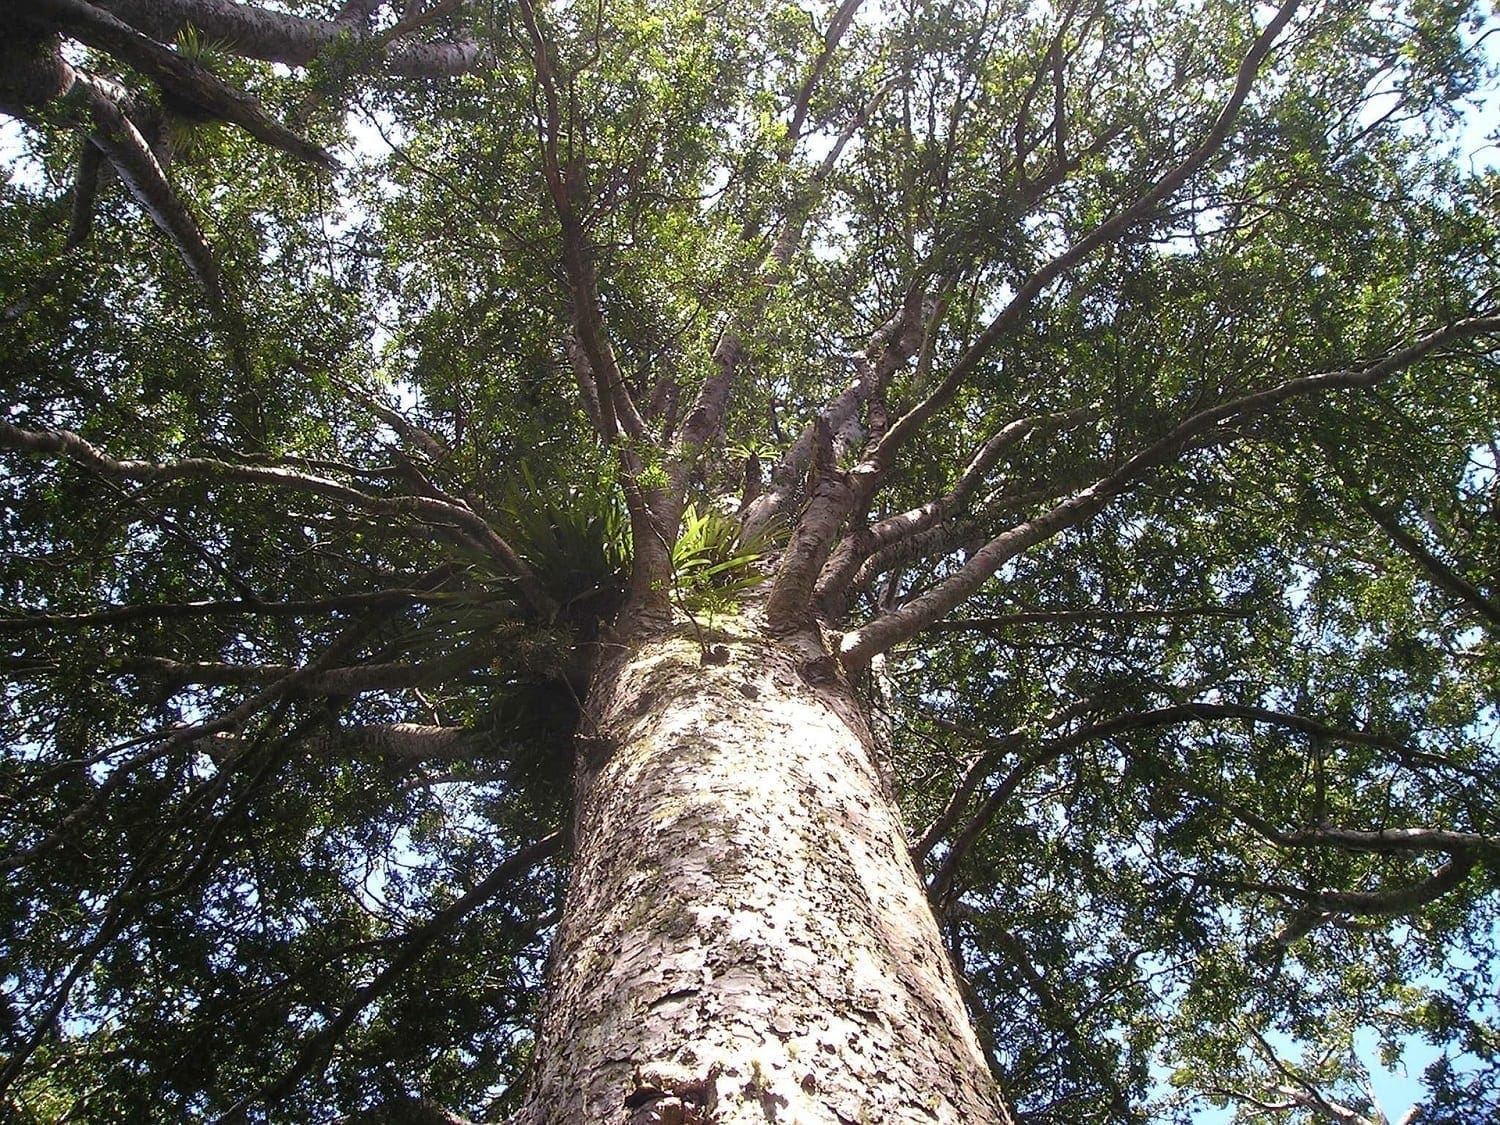 Crown of a Kauri Tree growing in New Zealand today